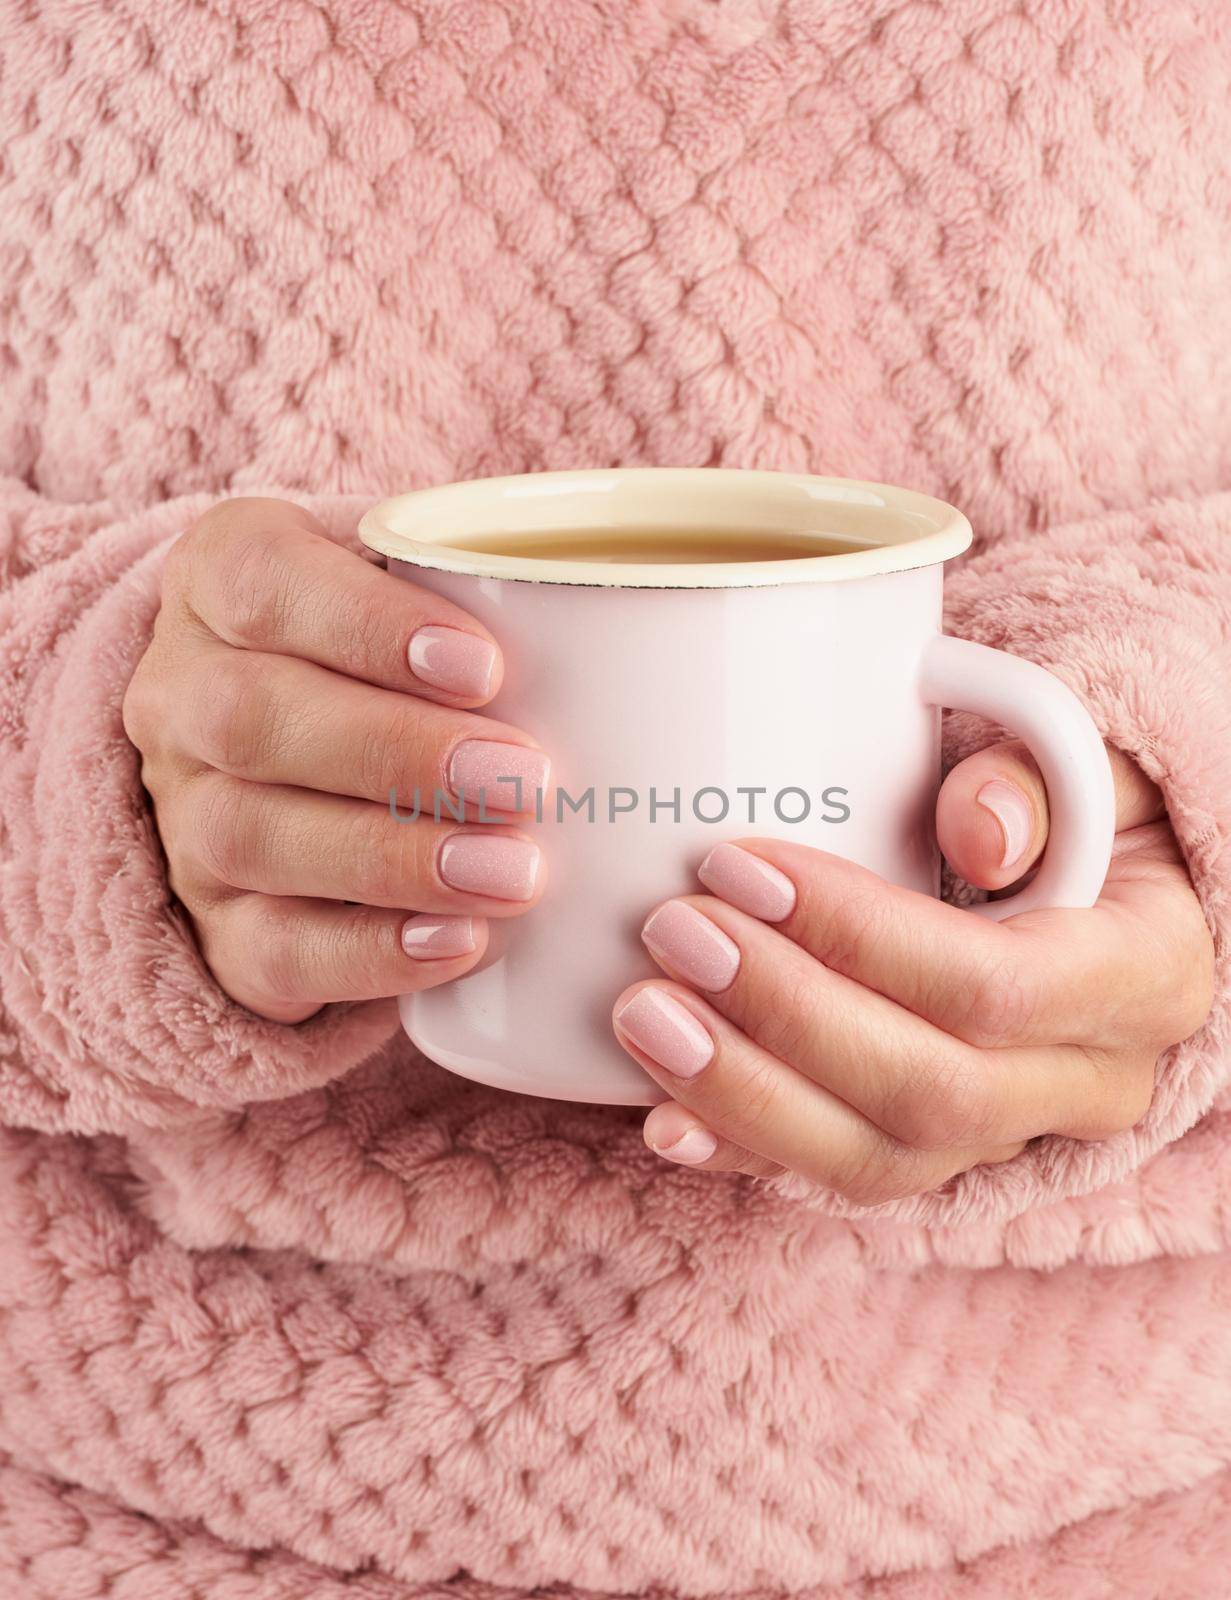 morning hot coffee on a cold autumn morning, hands holding a mug with a drink, cozy atmosphere, vertical